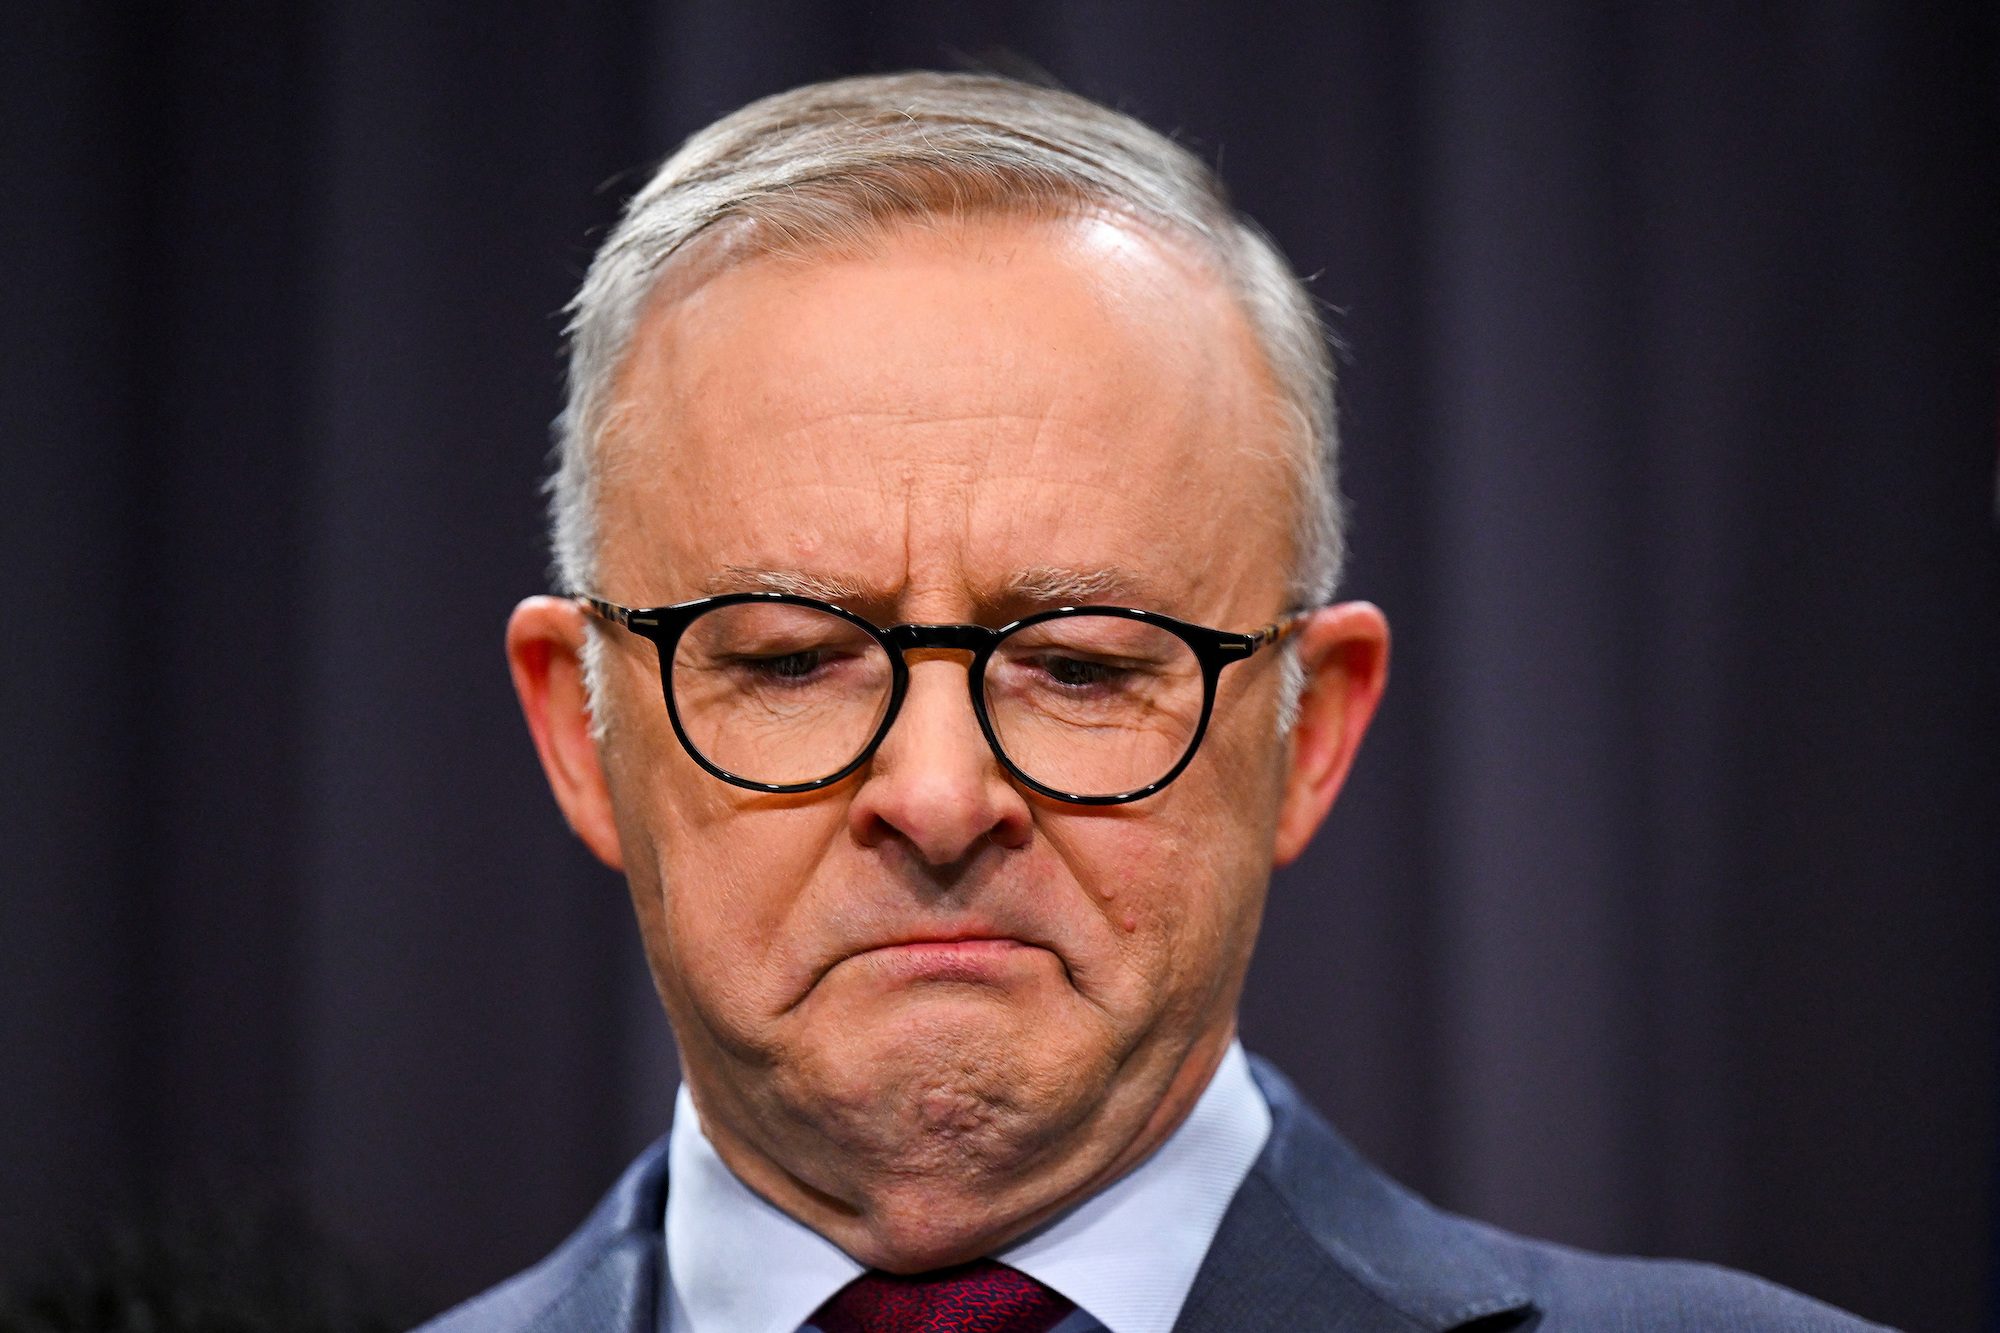 ‘If not now, when?’: Emotional Australian PM reveals next steps on indigenous referendum